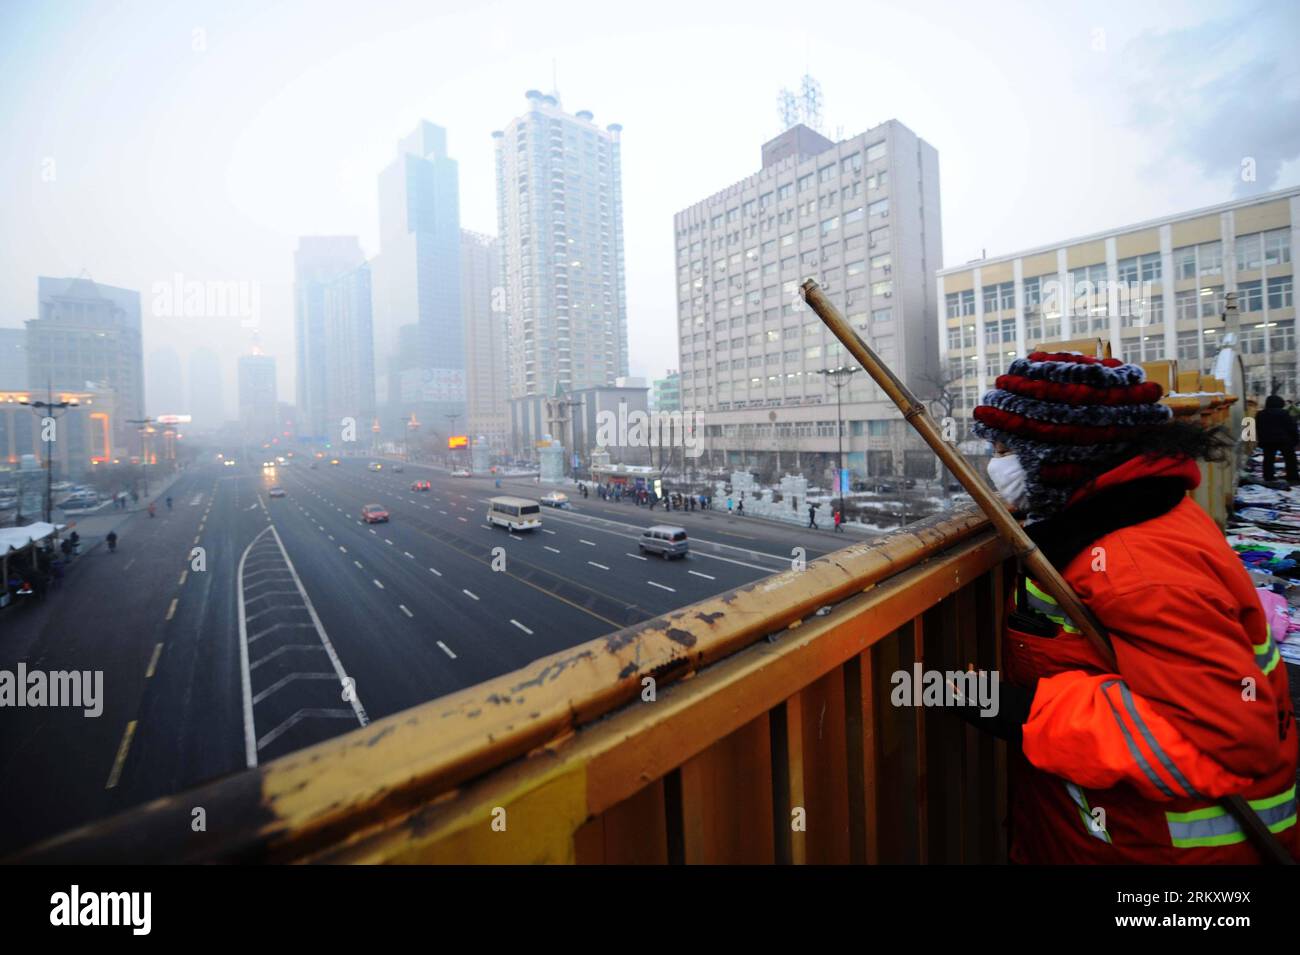 Bildnummer: 59095372  Datum: 16.01.2013  Copyright: imago/Xinhua HARBIN, Jan. 16, 2013 (Xinhua) -- Sanitation worker Yang Weixia picks up a cigarette end from a bridge handrail in Harbin, capital of northeast China s Heilongjiang Province, Jan. 16, 2013. Yang Weixia, 48, is an ordinary sanitation worker living in Harbin, a city known for its bitterly cold winters and often called the Ice City. For 32 years, Yang has never stopped sweating away at her work, though she often gets up at three o clock every morning and will not go back home until 9 in the evening in the cold winter. There are more Stock Photo